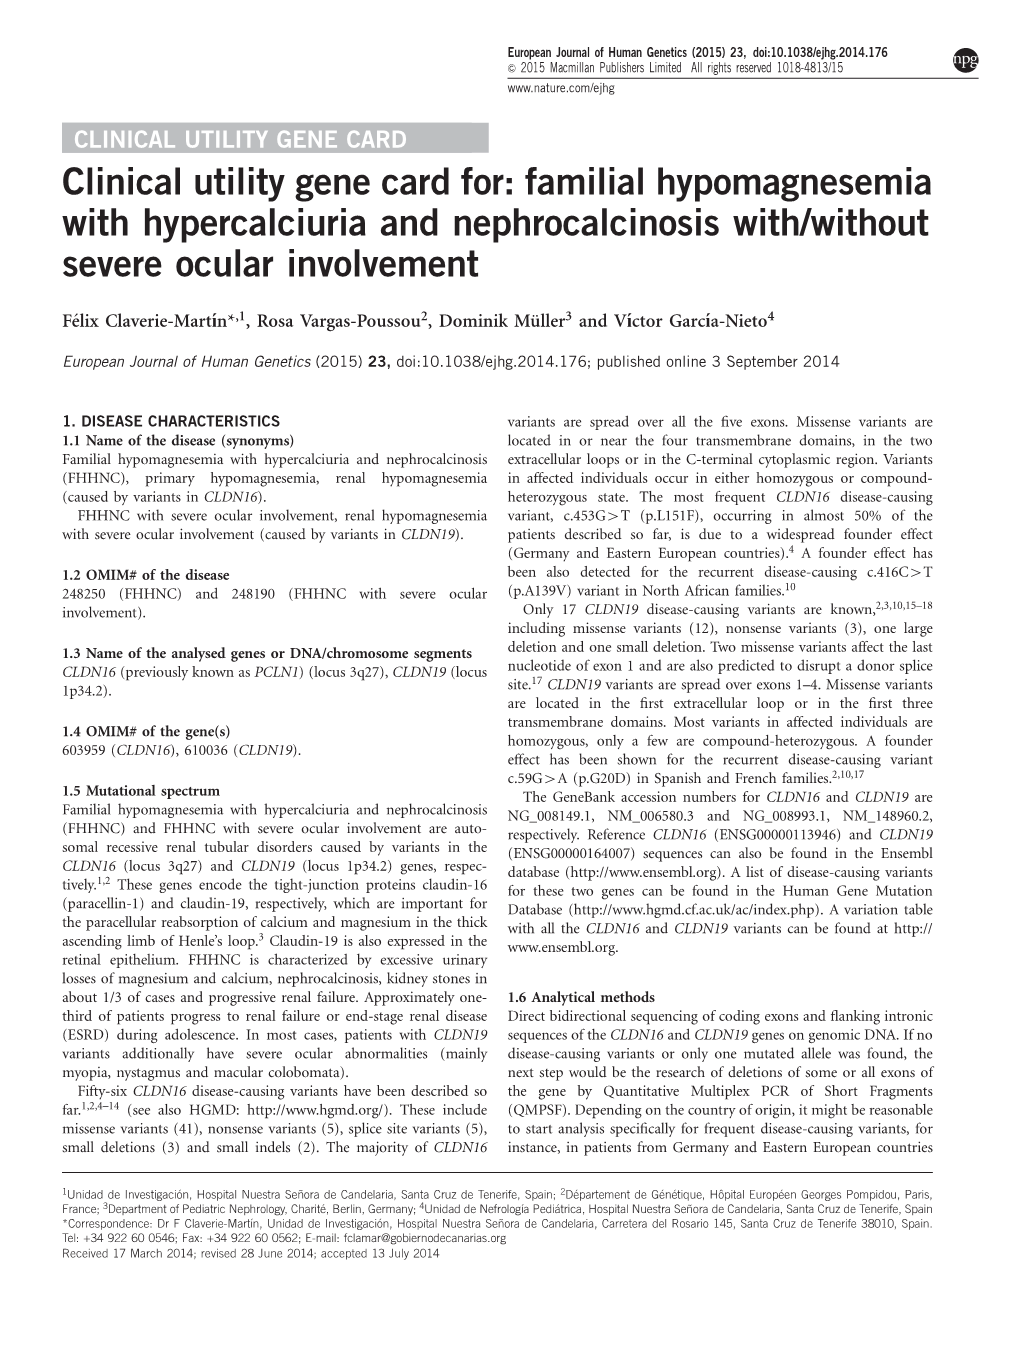 Clinical Utility Gene Card For: Familial Hypomagnesemia with Hypercalciuria and Nephrocalcinosis With/Without Severe Ocular Involvement